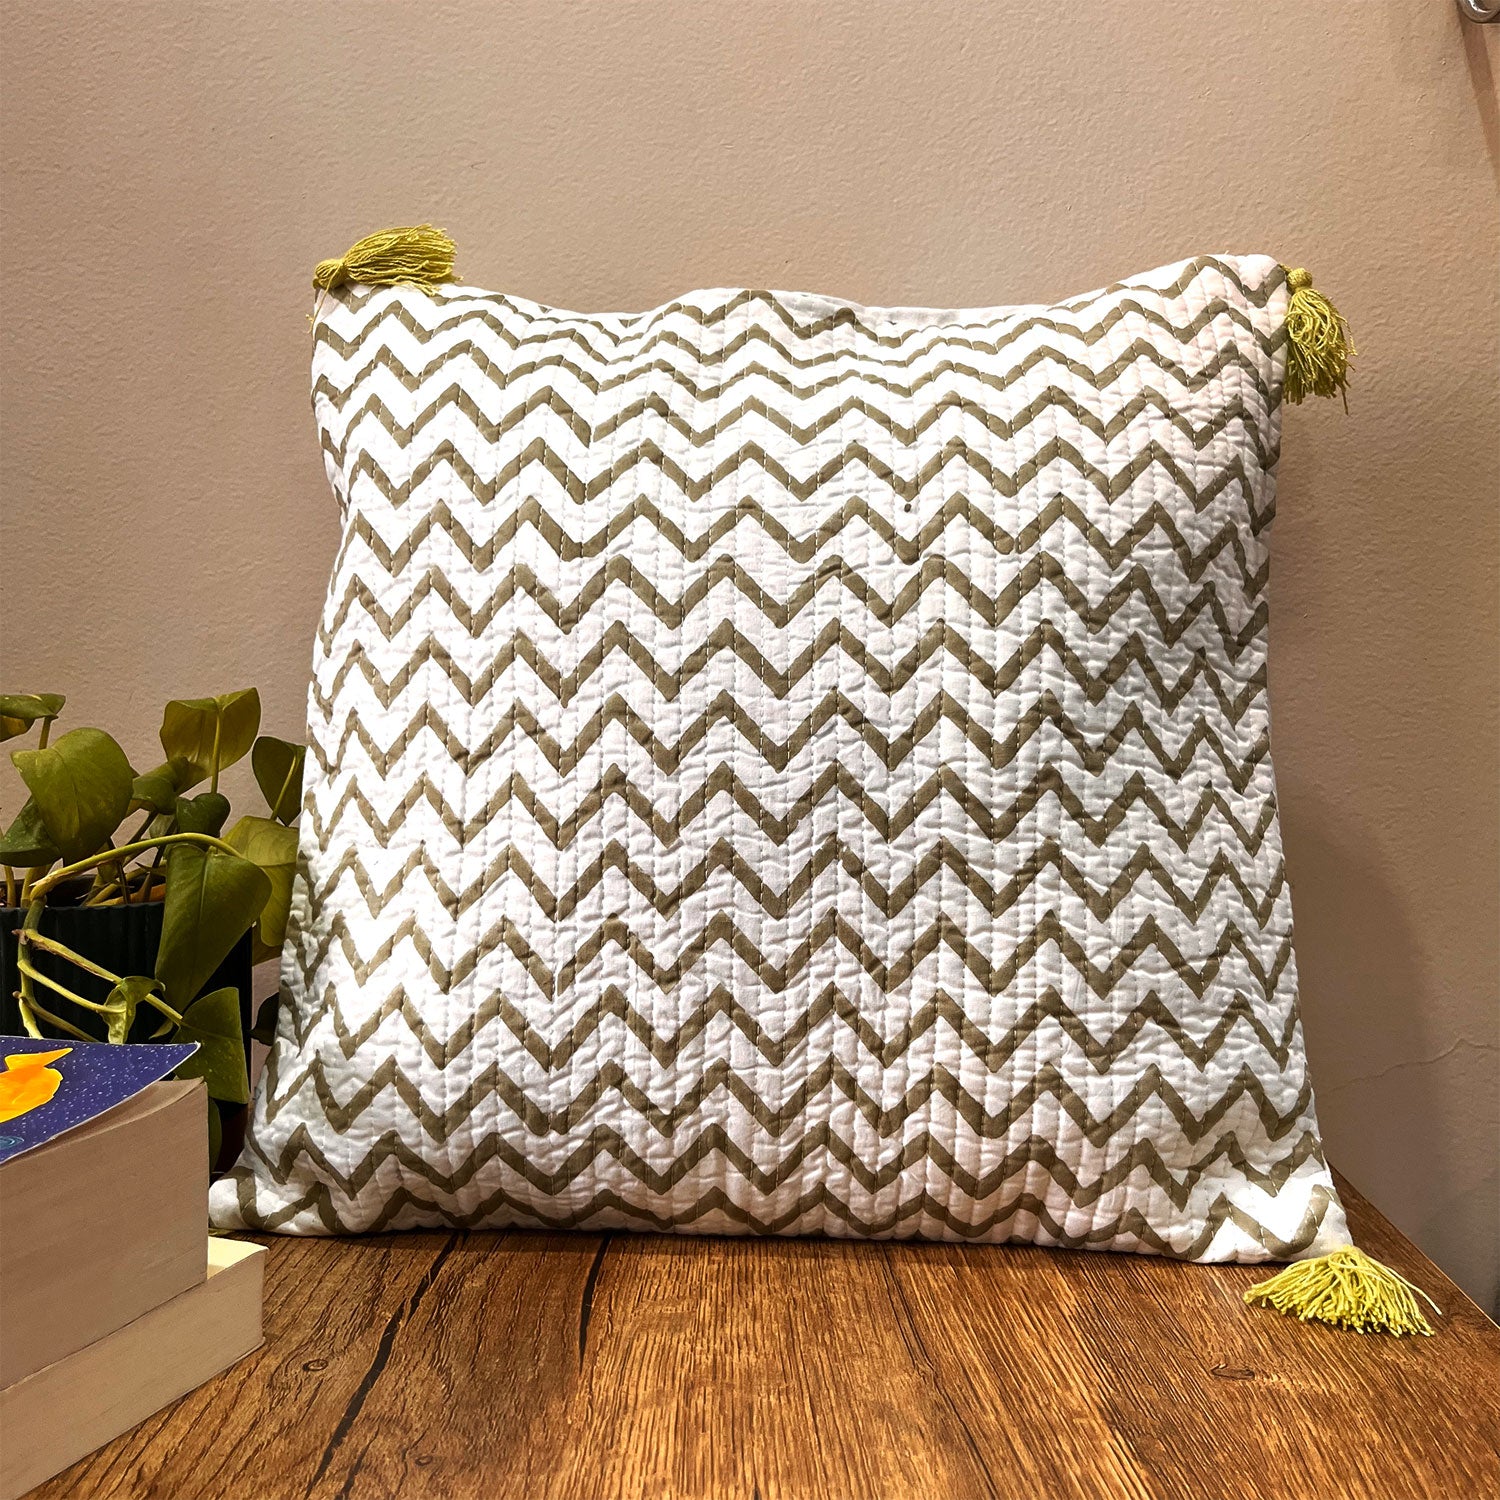 Muted Green Quilted Cotton Cushion Cover - 16 x 16 inches